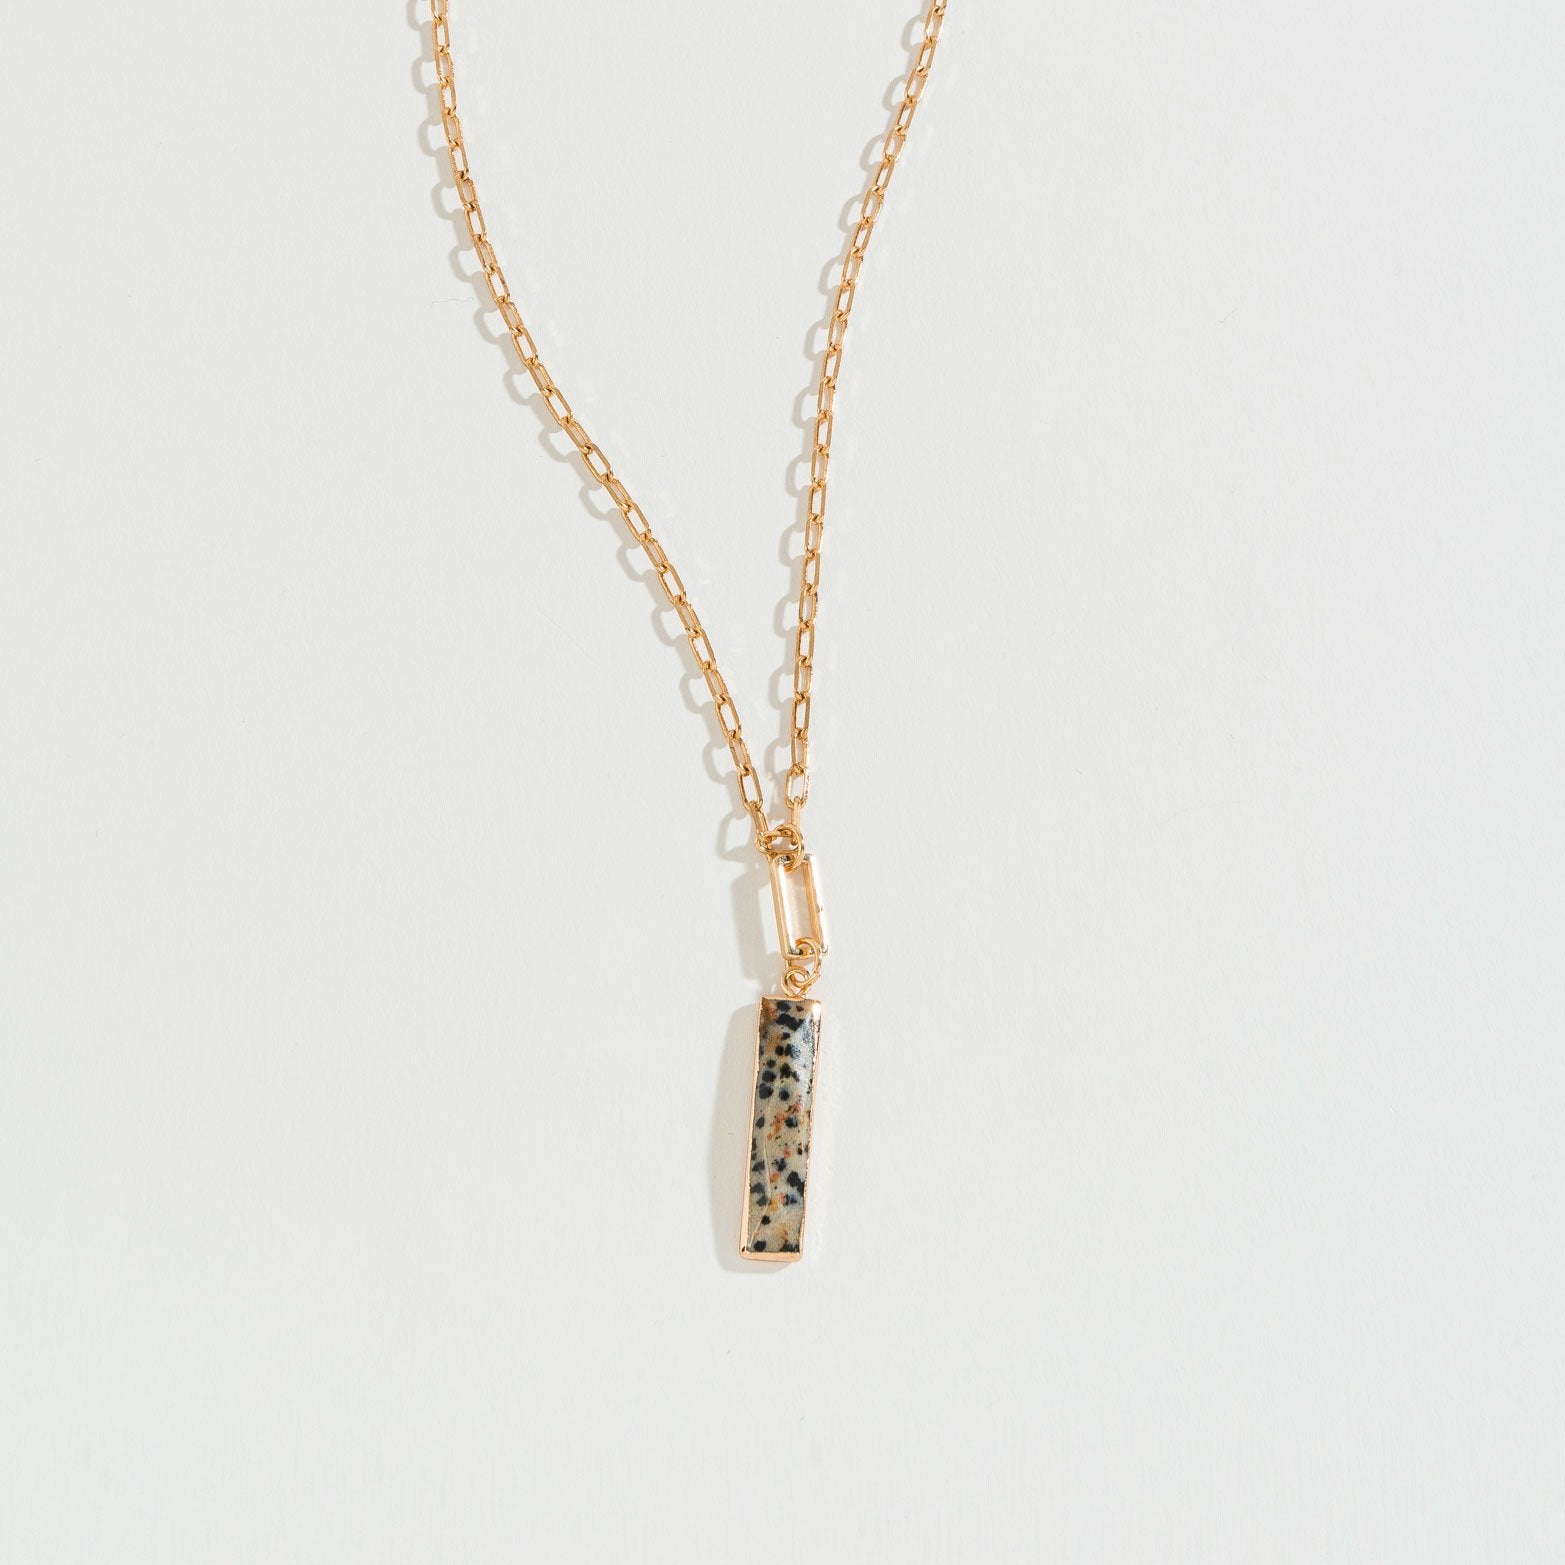 RECTANGLE STONE WITH GOLD CHAIN PENDANT NECKLACE